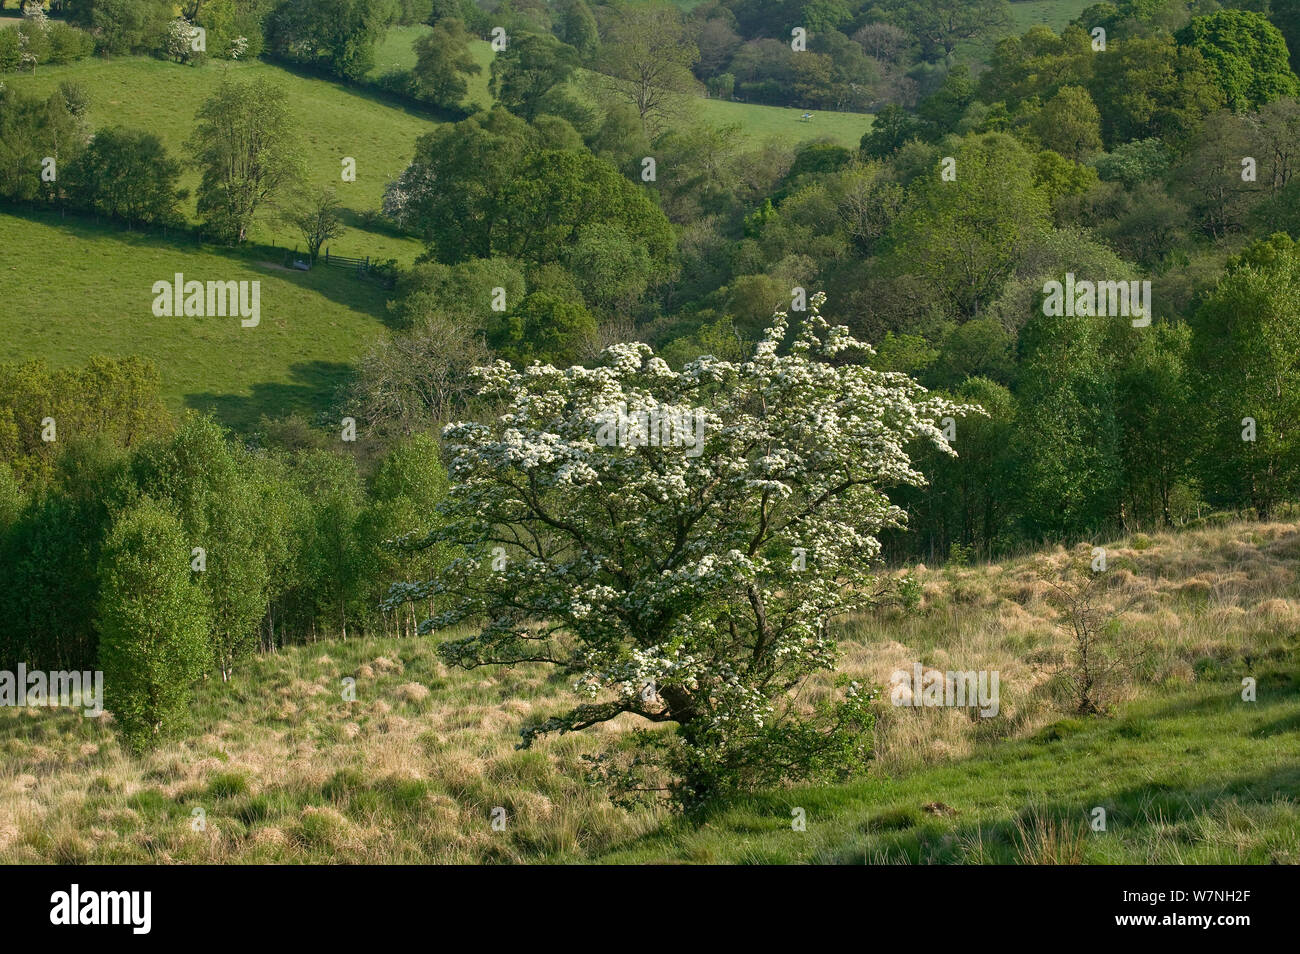 Hawthorn in flower (Cratagus monogyna) in boggy field, ideal habitat for Small Pearl Bordered Fritillary butterfly in upland Gilfach Nature Reserve, Radnorshire Wildlife Trust, Powys, Wales, UK May Stock Photo